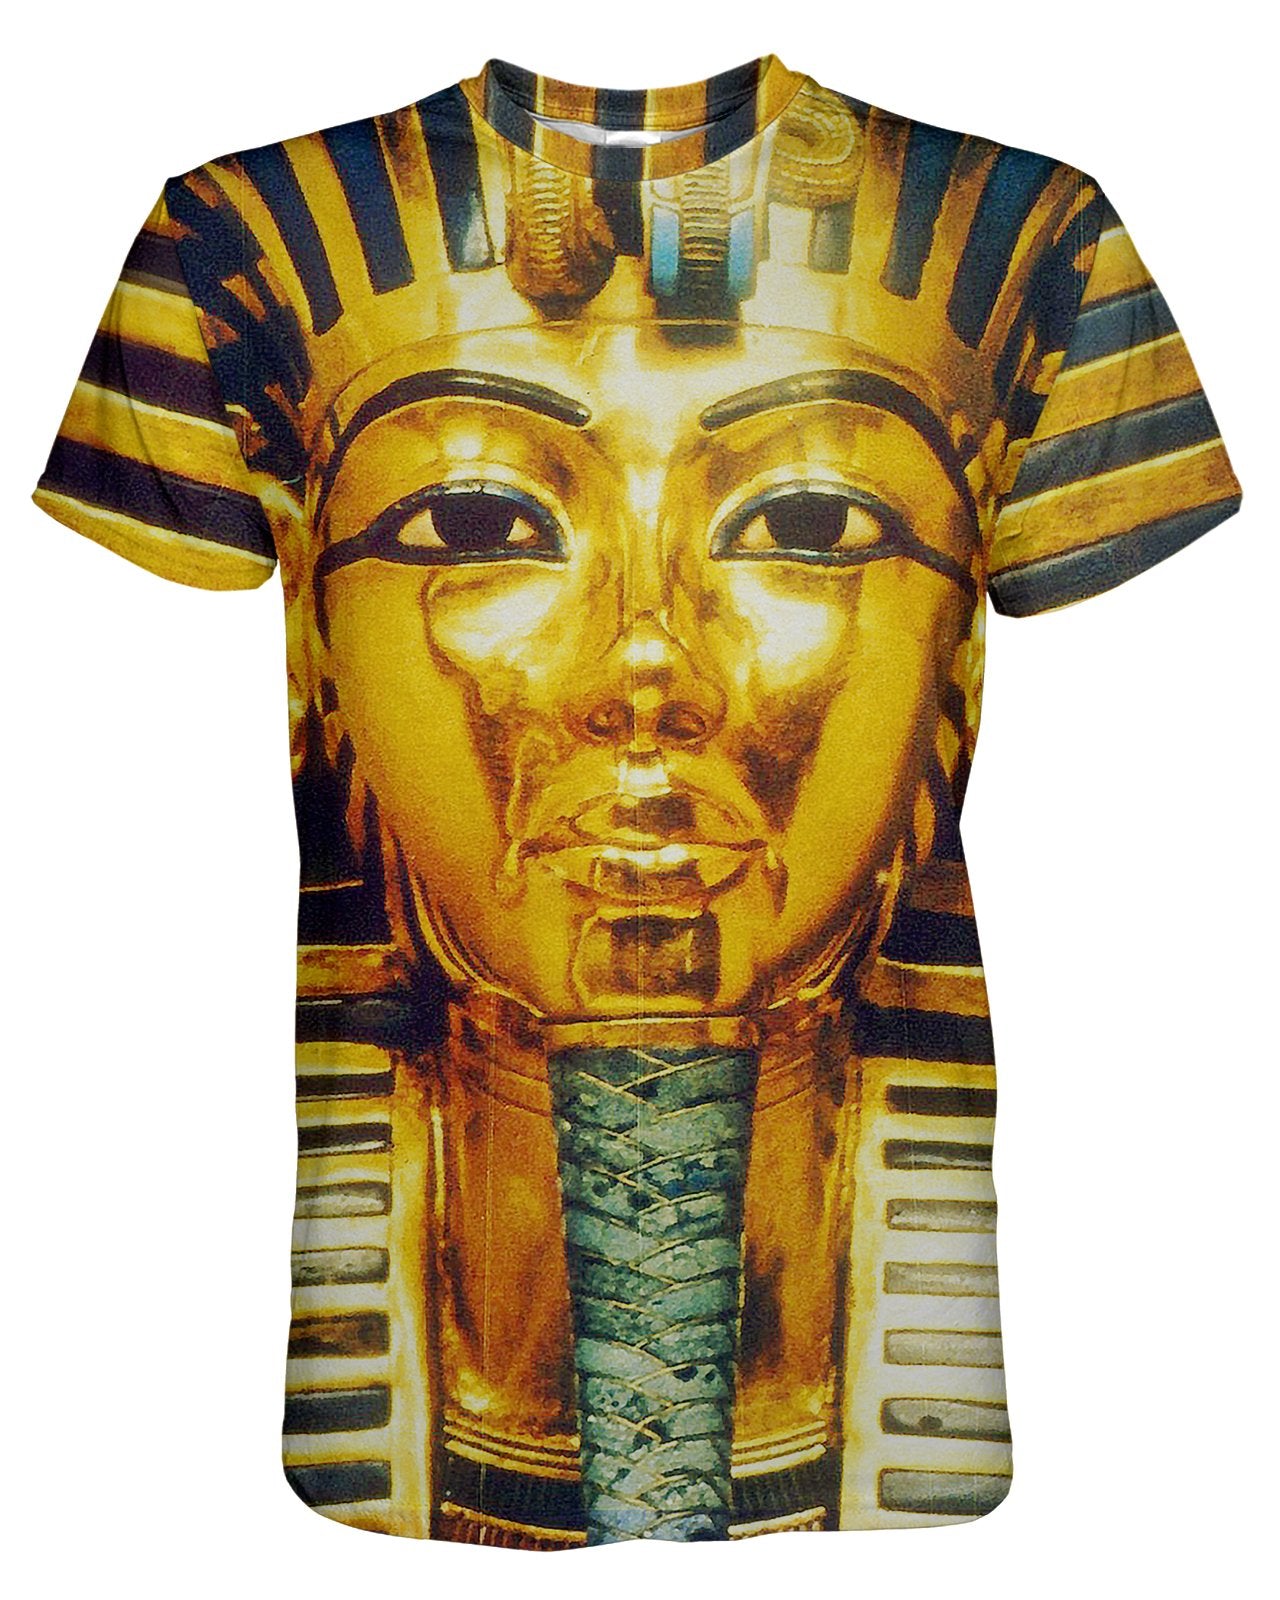 Home All products Pharaoh T-shirt